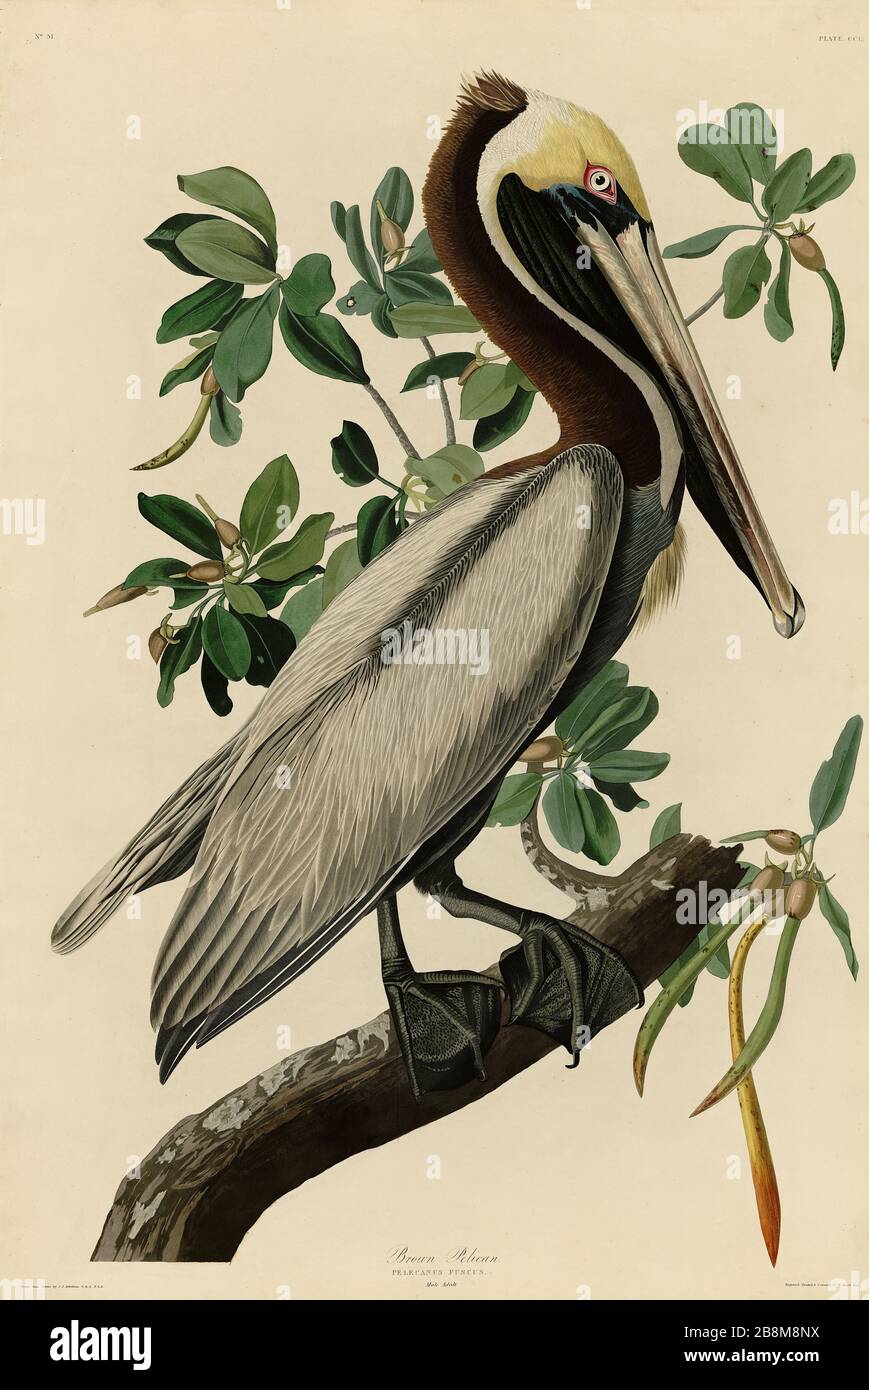 Plate 251 Brown Pelican, from The Birds of America folio (1827–1839) by John James Audubon - Very high resolution and quality edited image Stock Photo